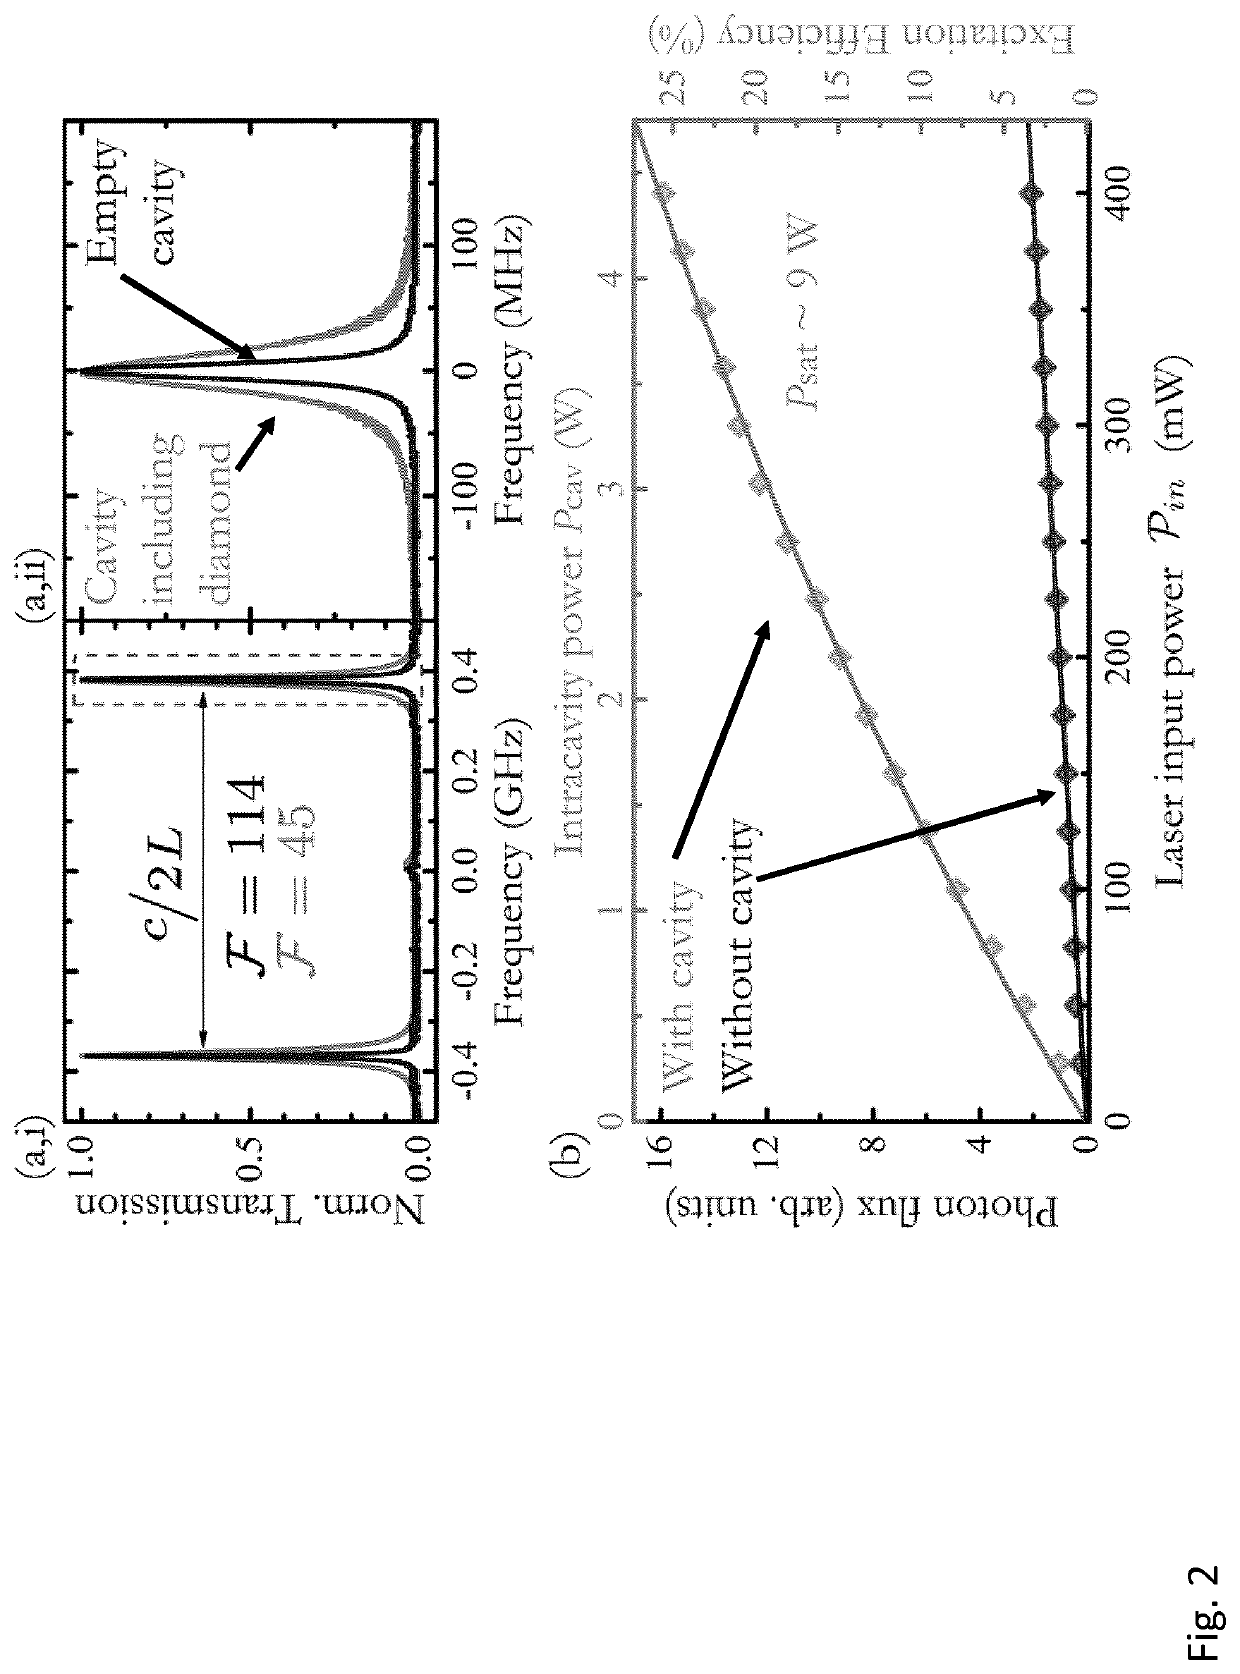 Magnetometer for measuring an unknown external magnetic field